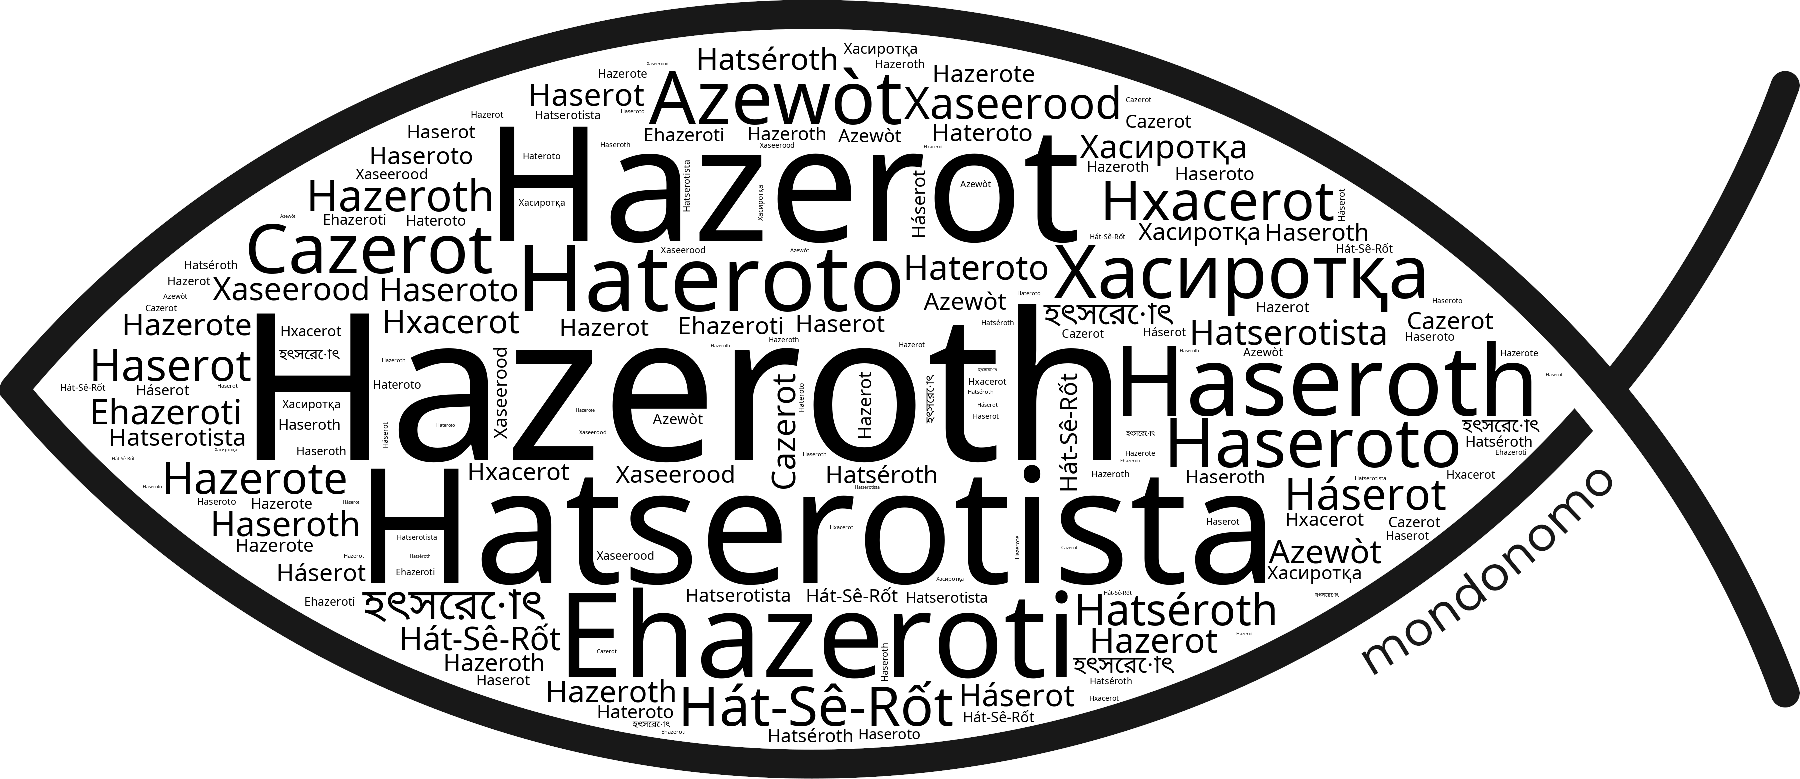 Name Hazeroth in the world's Bibles